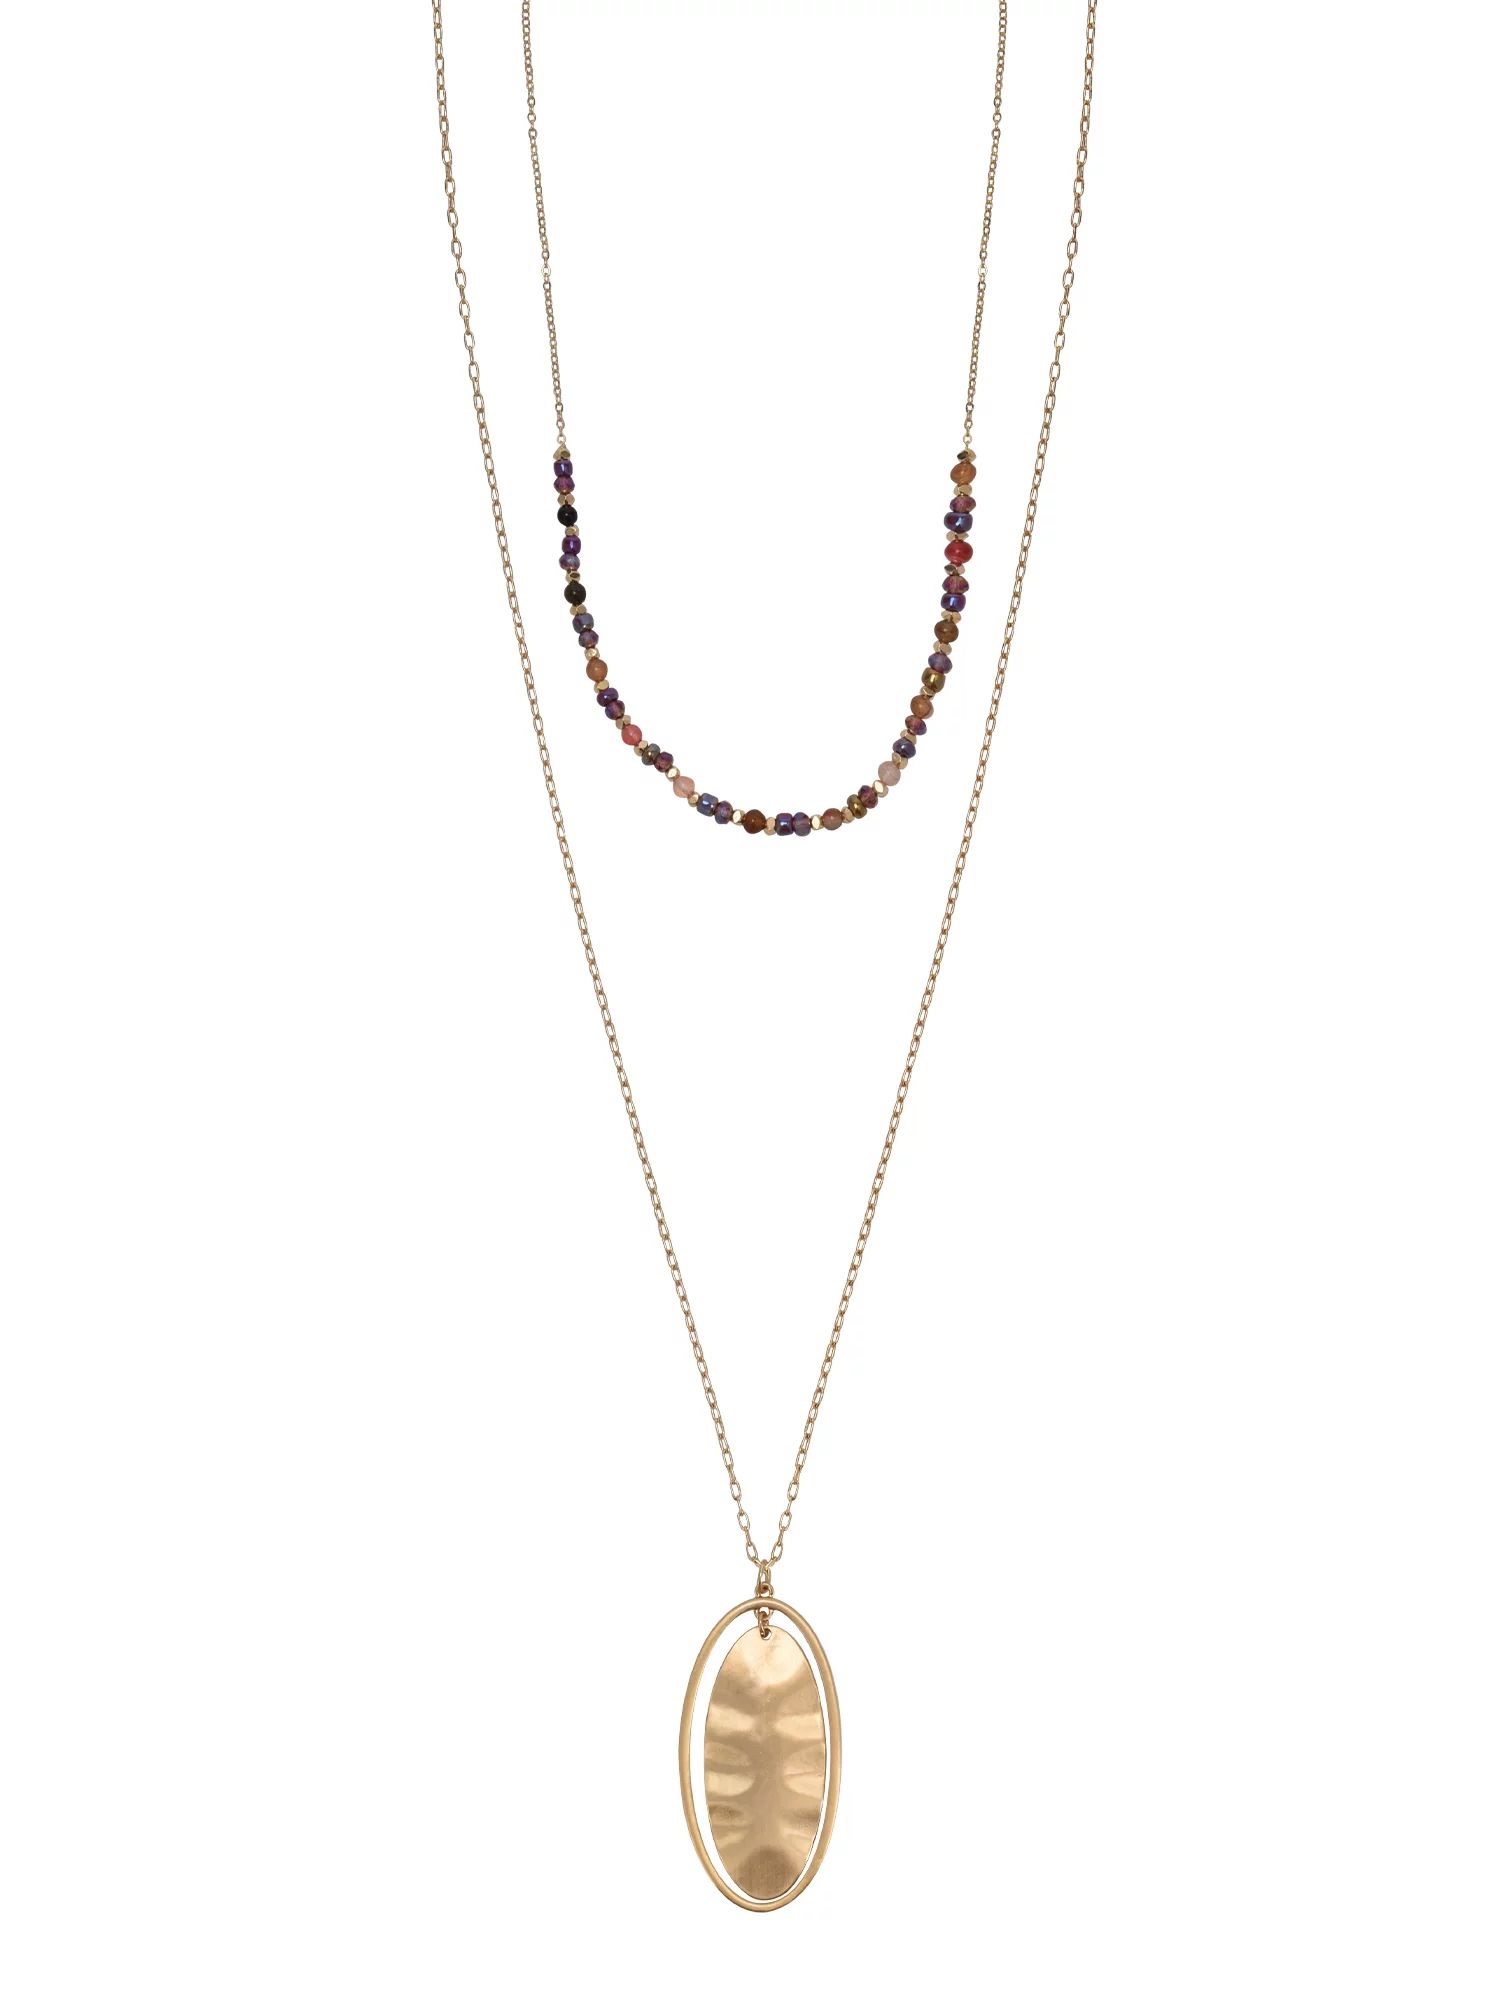 The Pioneer Woman - Women's Jewelry, Soft Gold-tone Duo Beaded Necklace Set | Walmart (US)